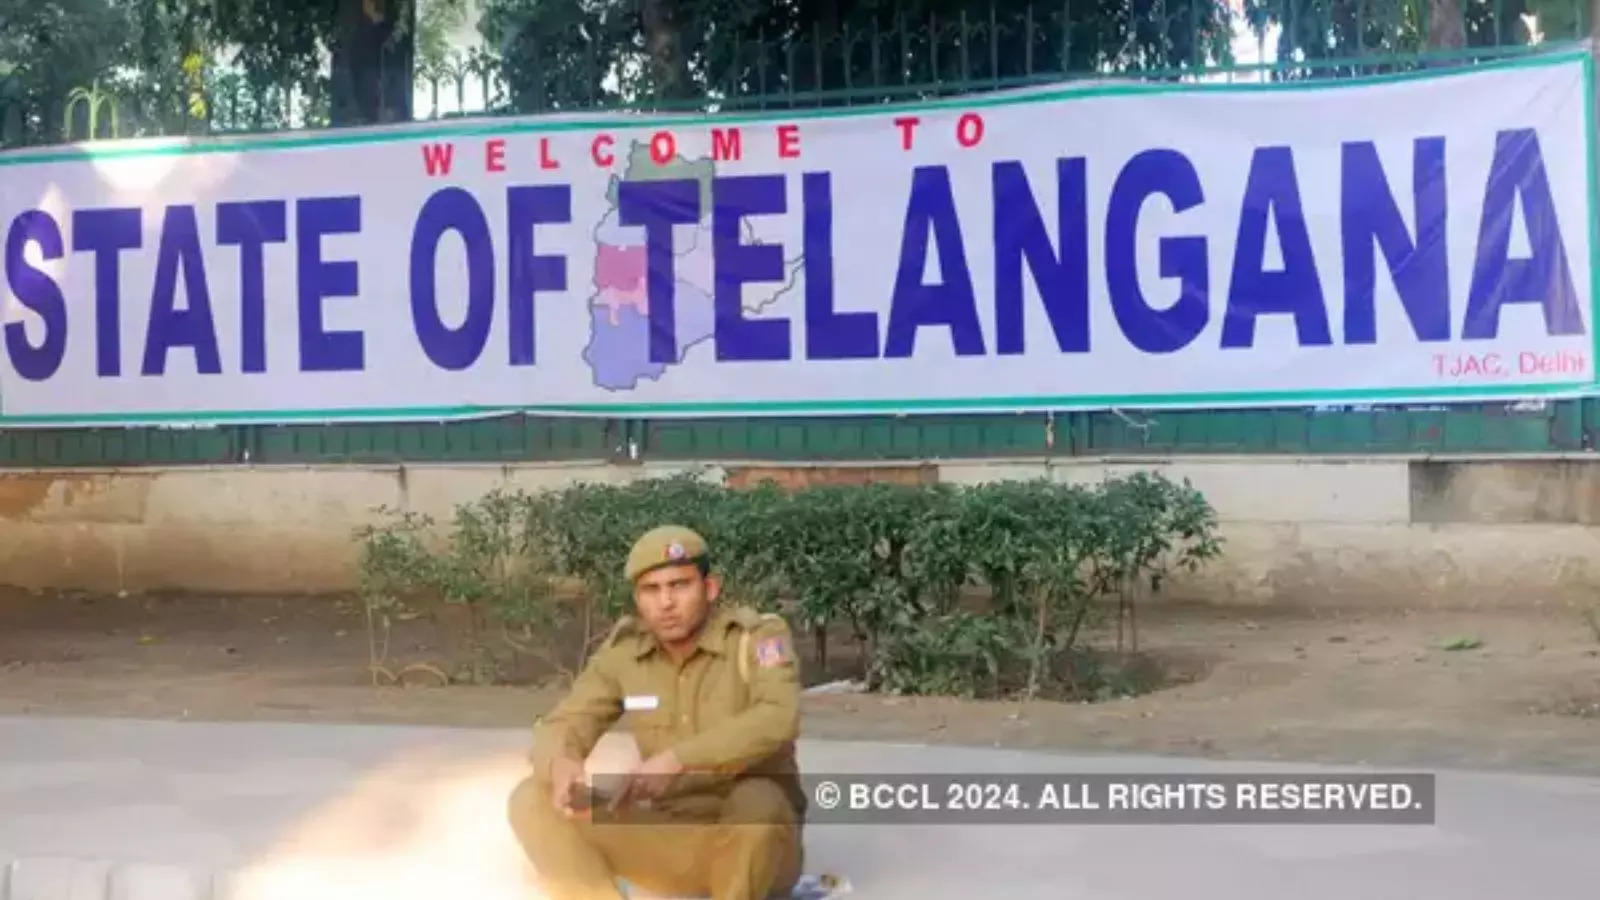 Telangana Day: Why and how did Telangana become separate? Know the story of becoming the 29th state of the country